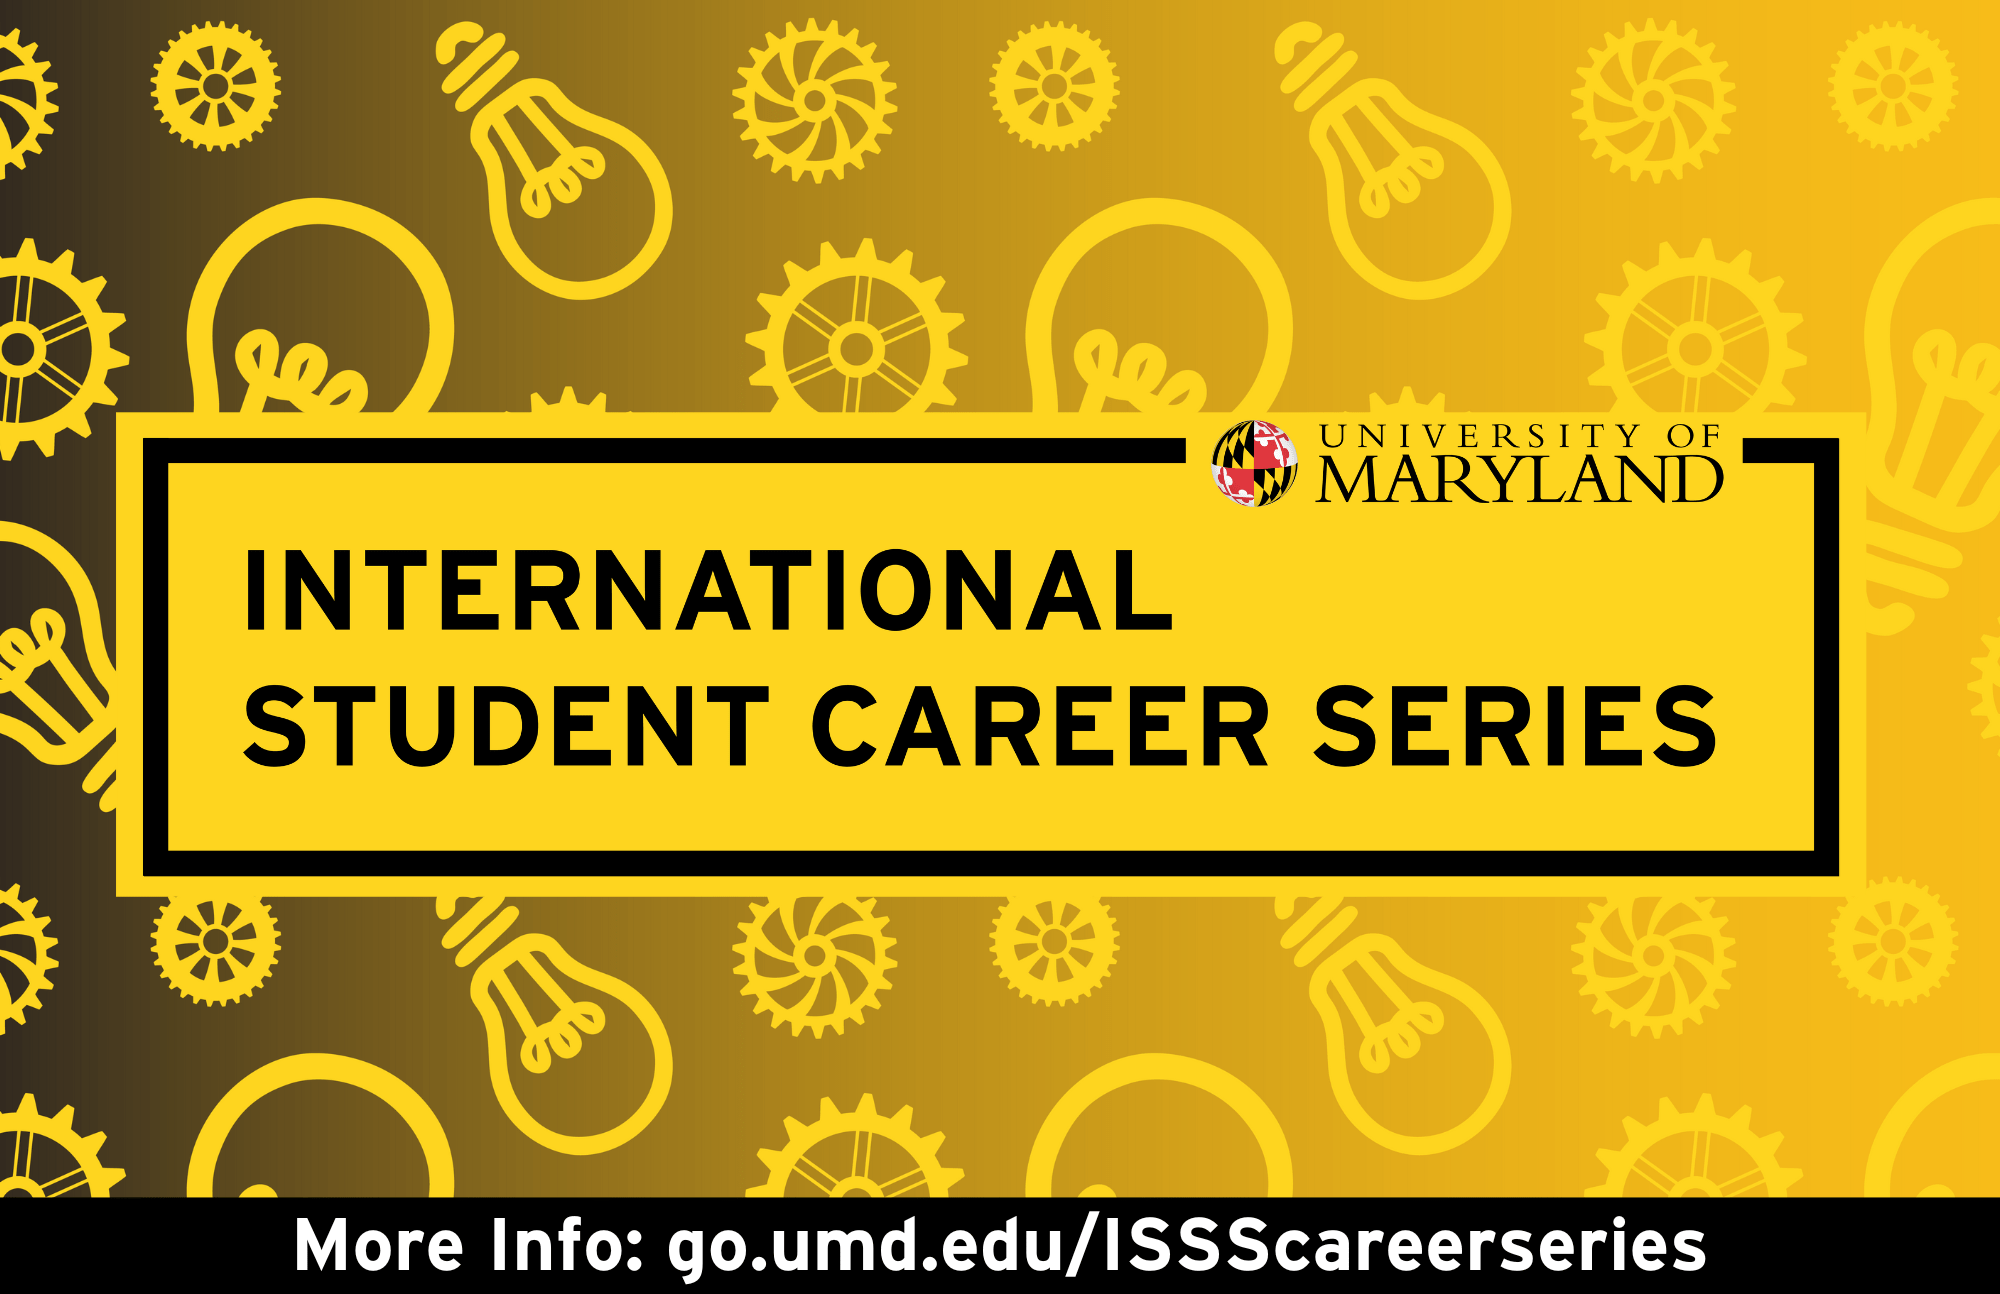 Graphic with lightbulbs and mechanical wheels in a repeating pattern. Text reads "International Student Career Series" with the UMD logo. 